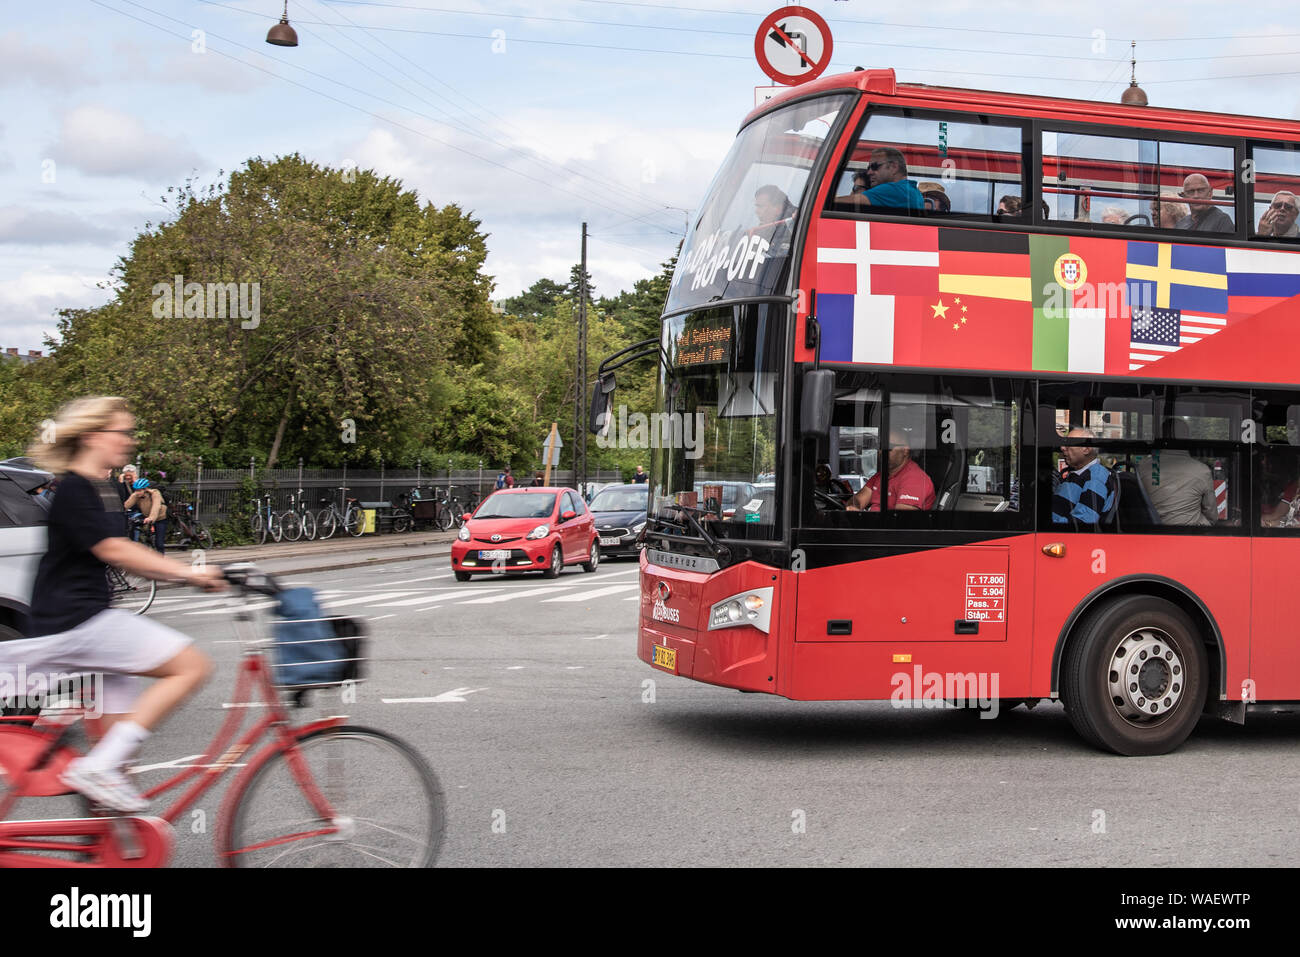 woman cycling without a helmet in front of a red hop on hop off bus in Copenhagen, August 16, 2019 Stock Photo